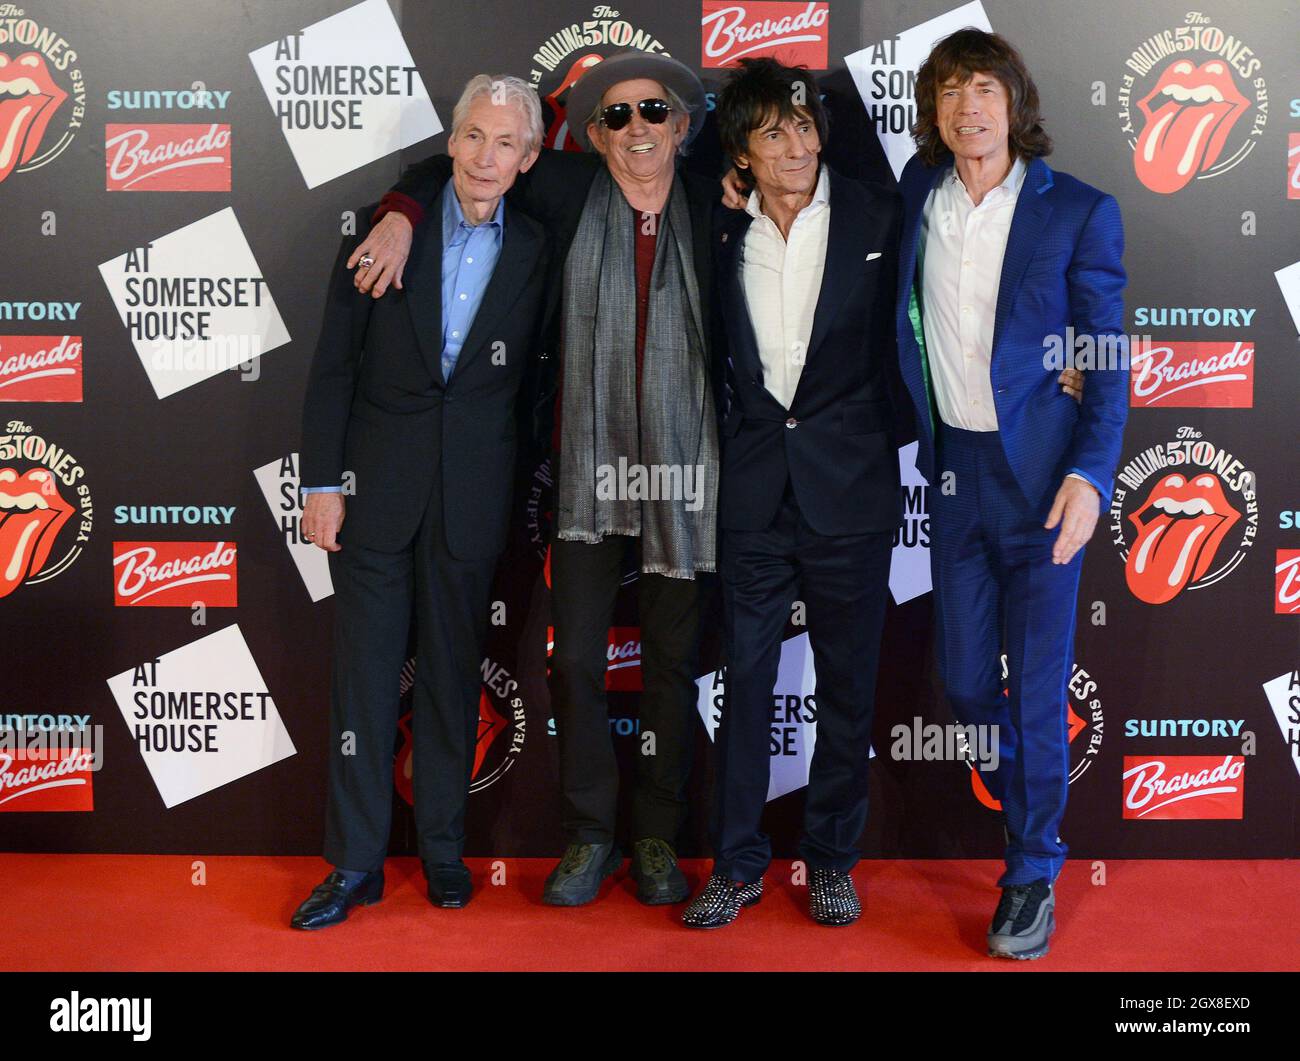 (L-R) Charlie Watts, Keith Richards, Ronnie Wood and Mick Jagger attend an exhibition to celebrate the 50th anniversary of The Rolling Stones at Somerset House on July 12, 2012. Stock Photo